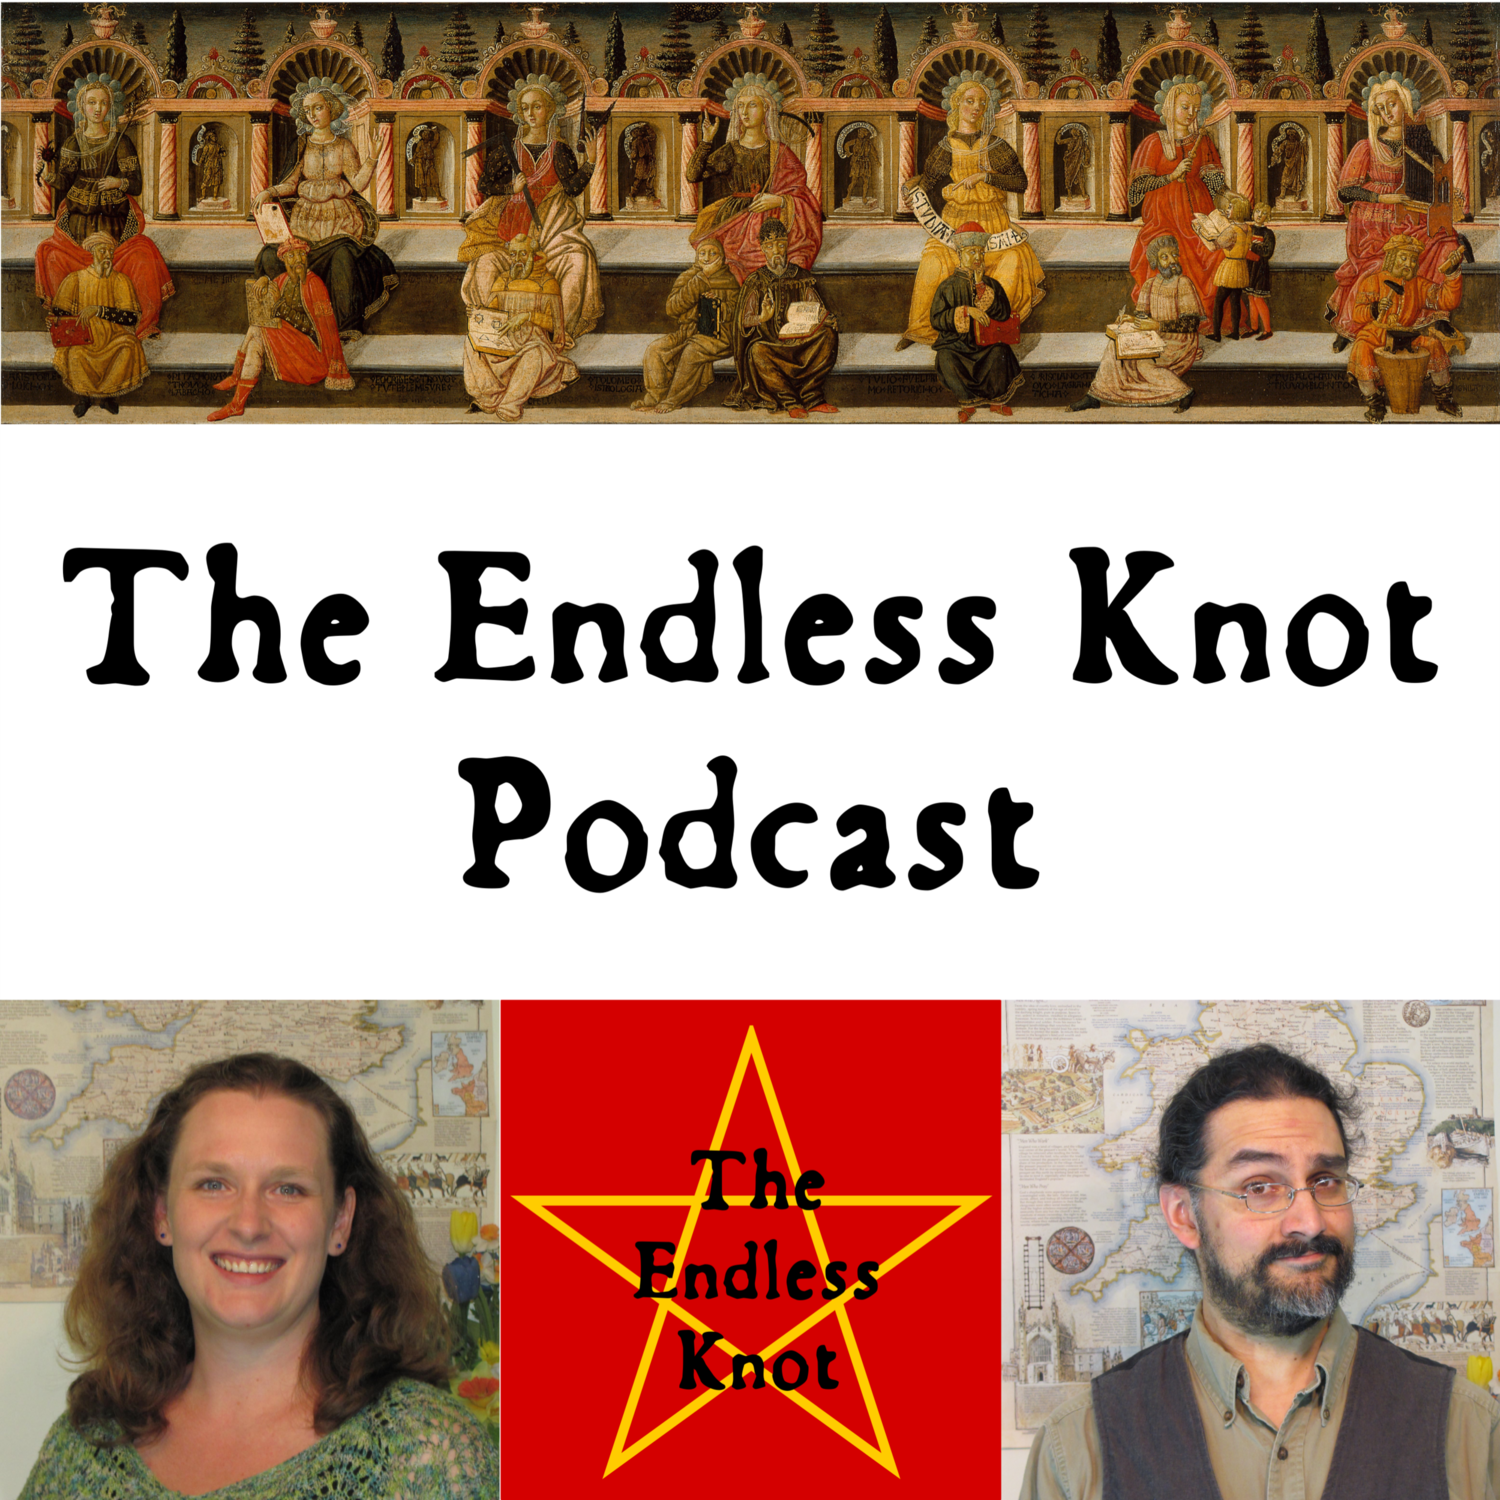 Podcast - The Endless Knot